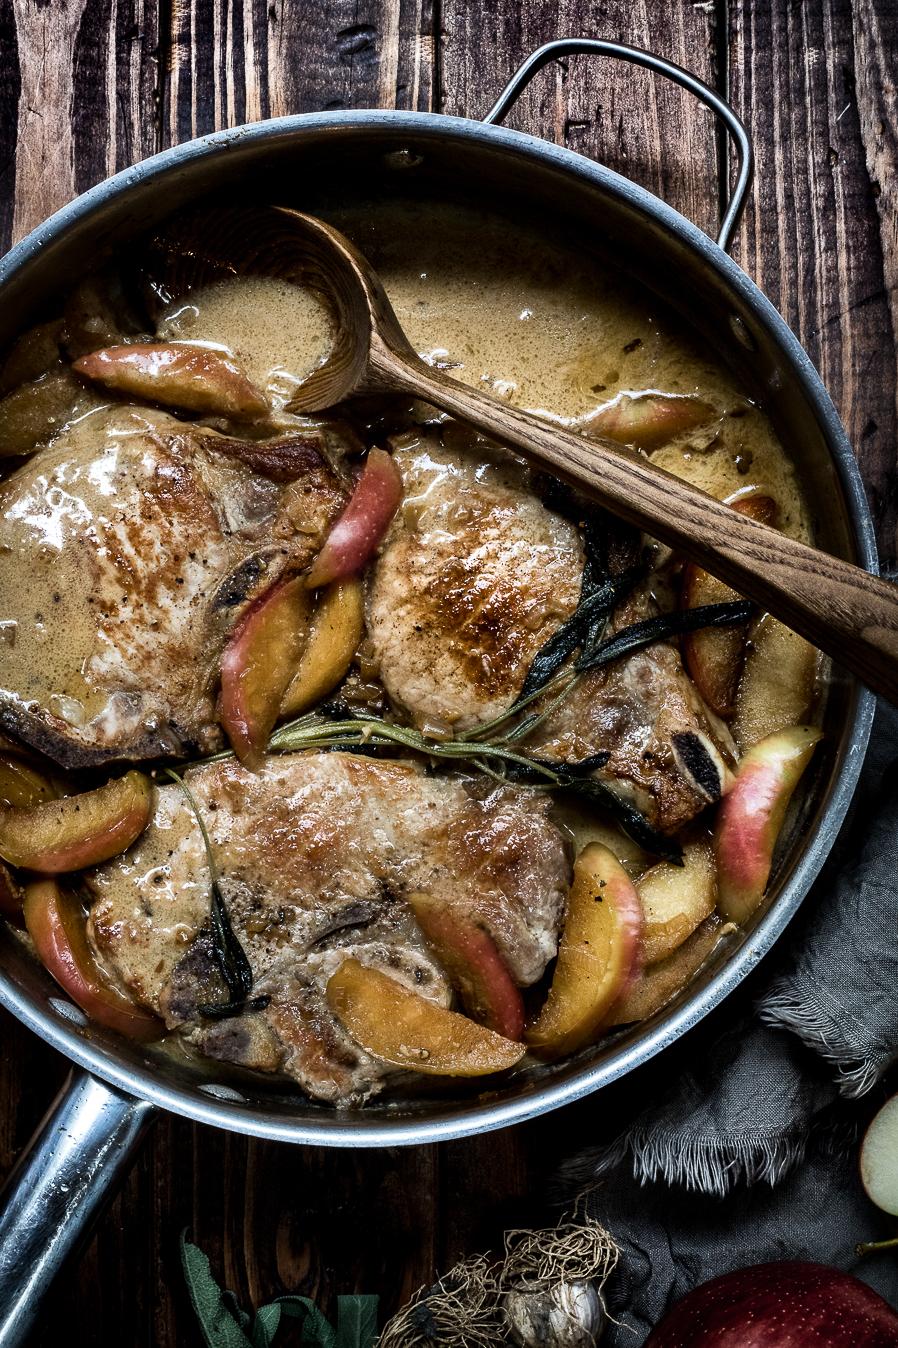  Sizzle and Savor with Our Pork Chops and Apples in Wine